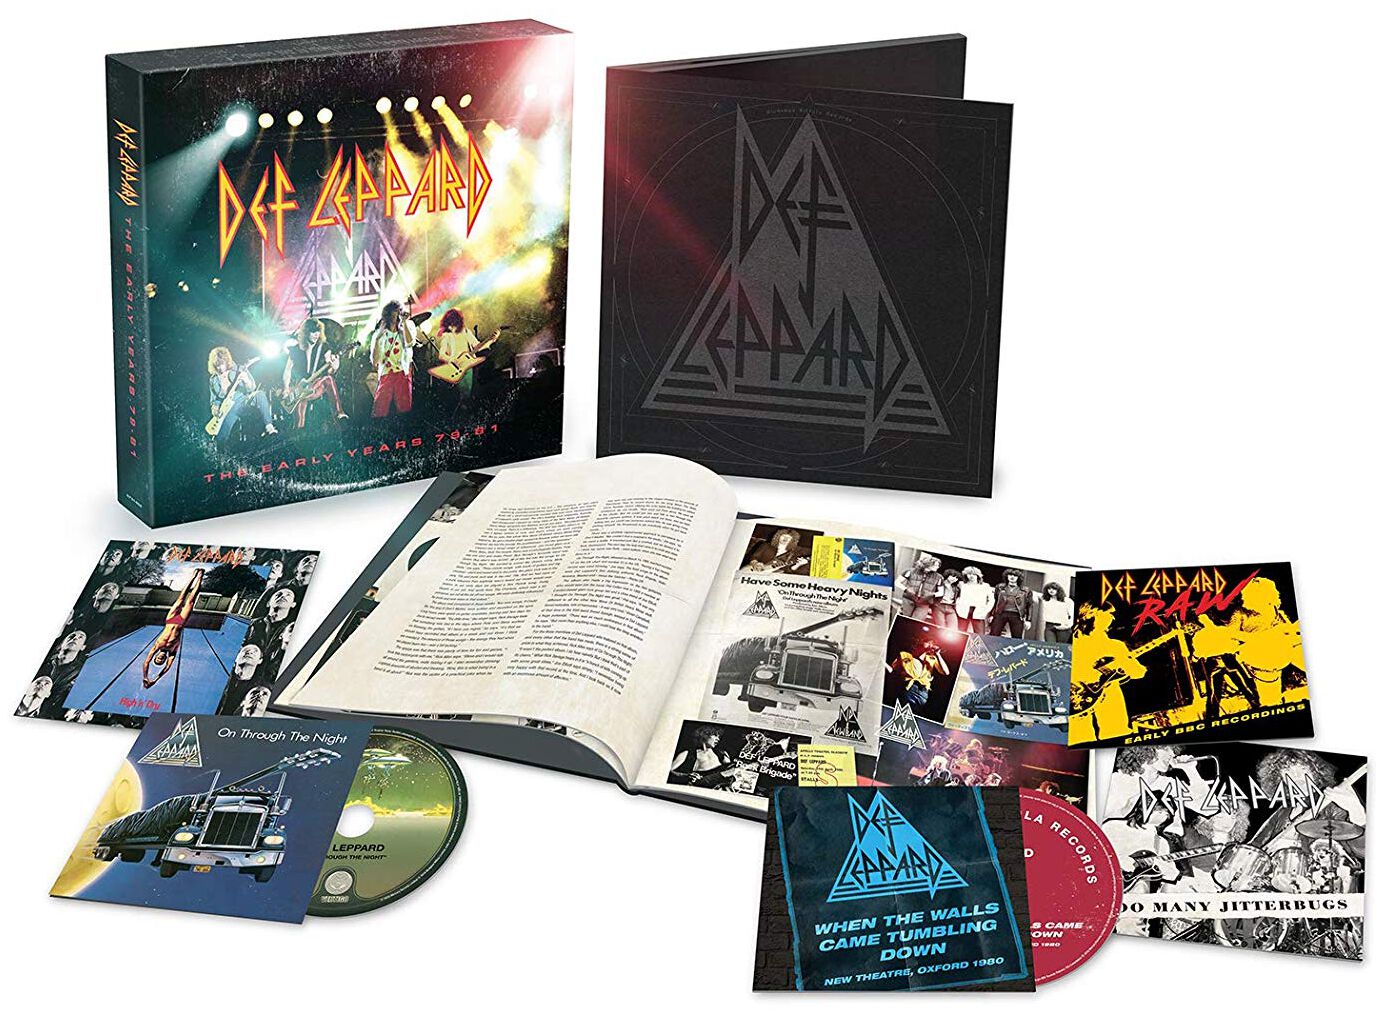 Def Leppard The early years 79-81 CD multicolor